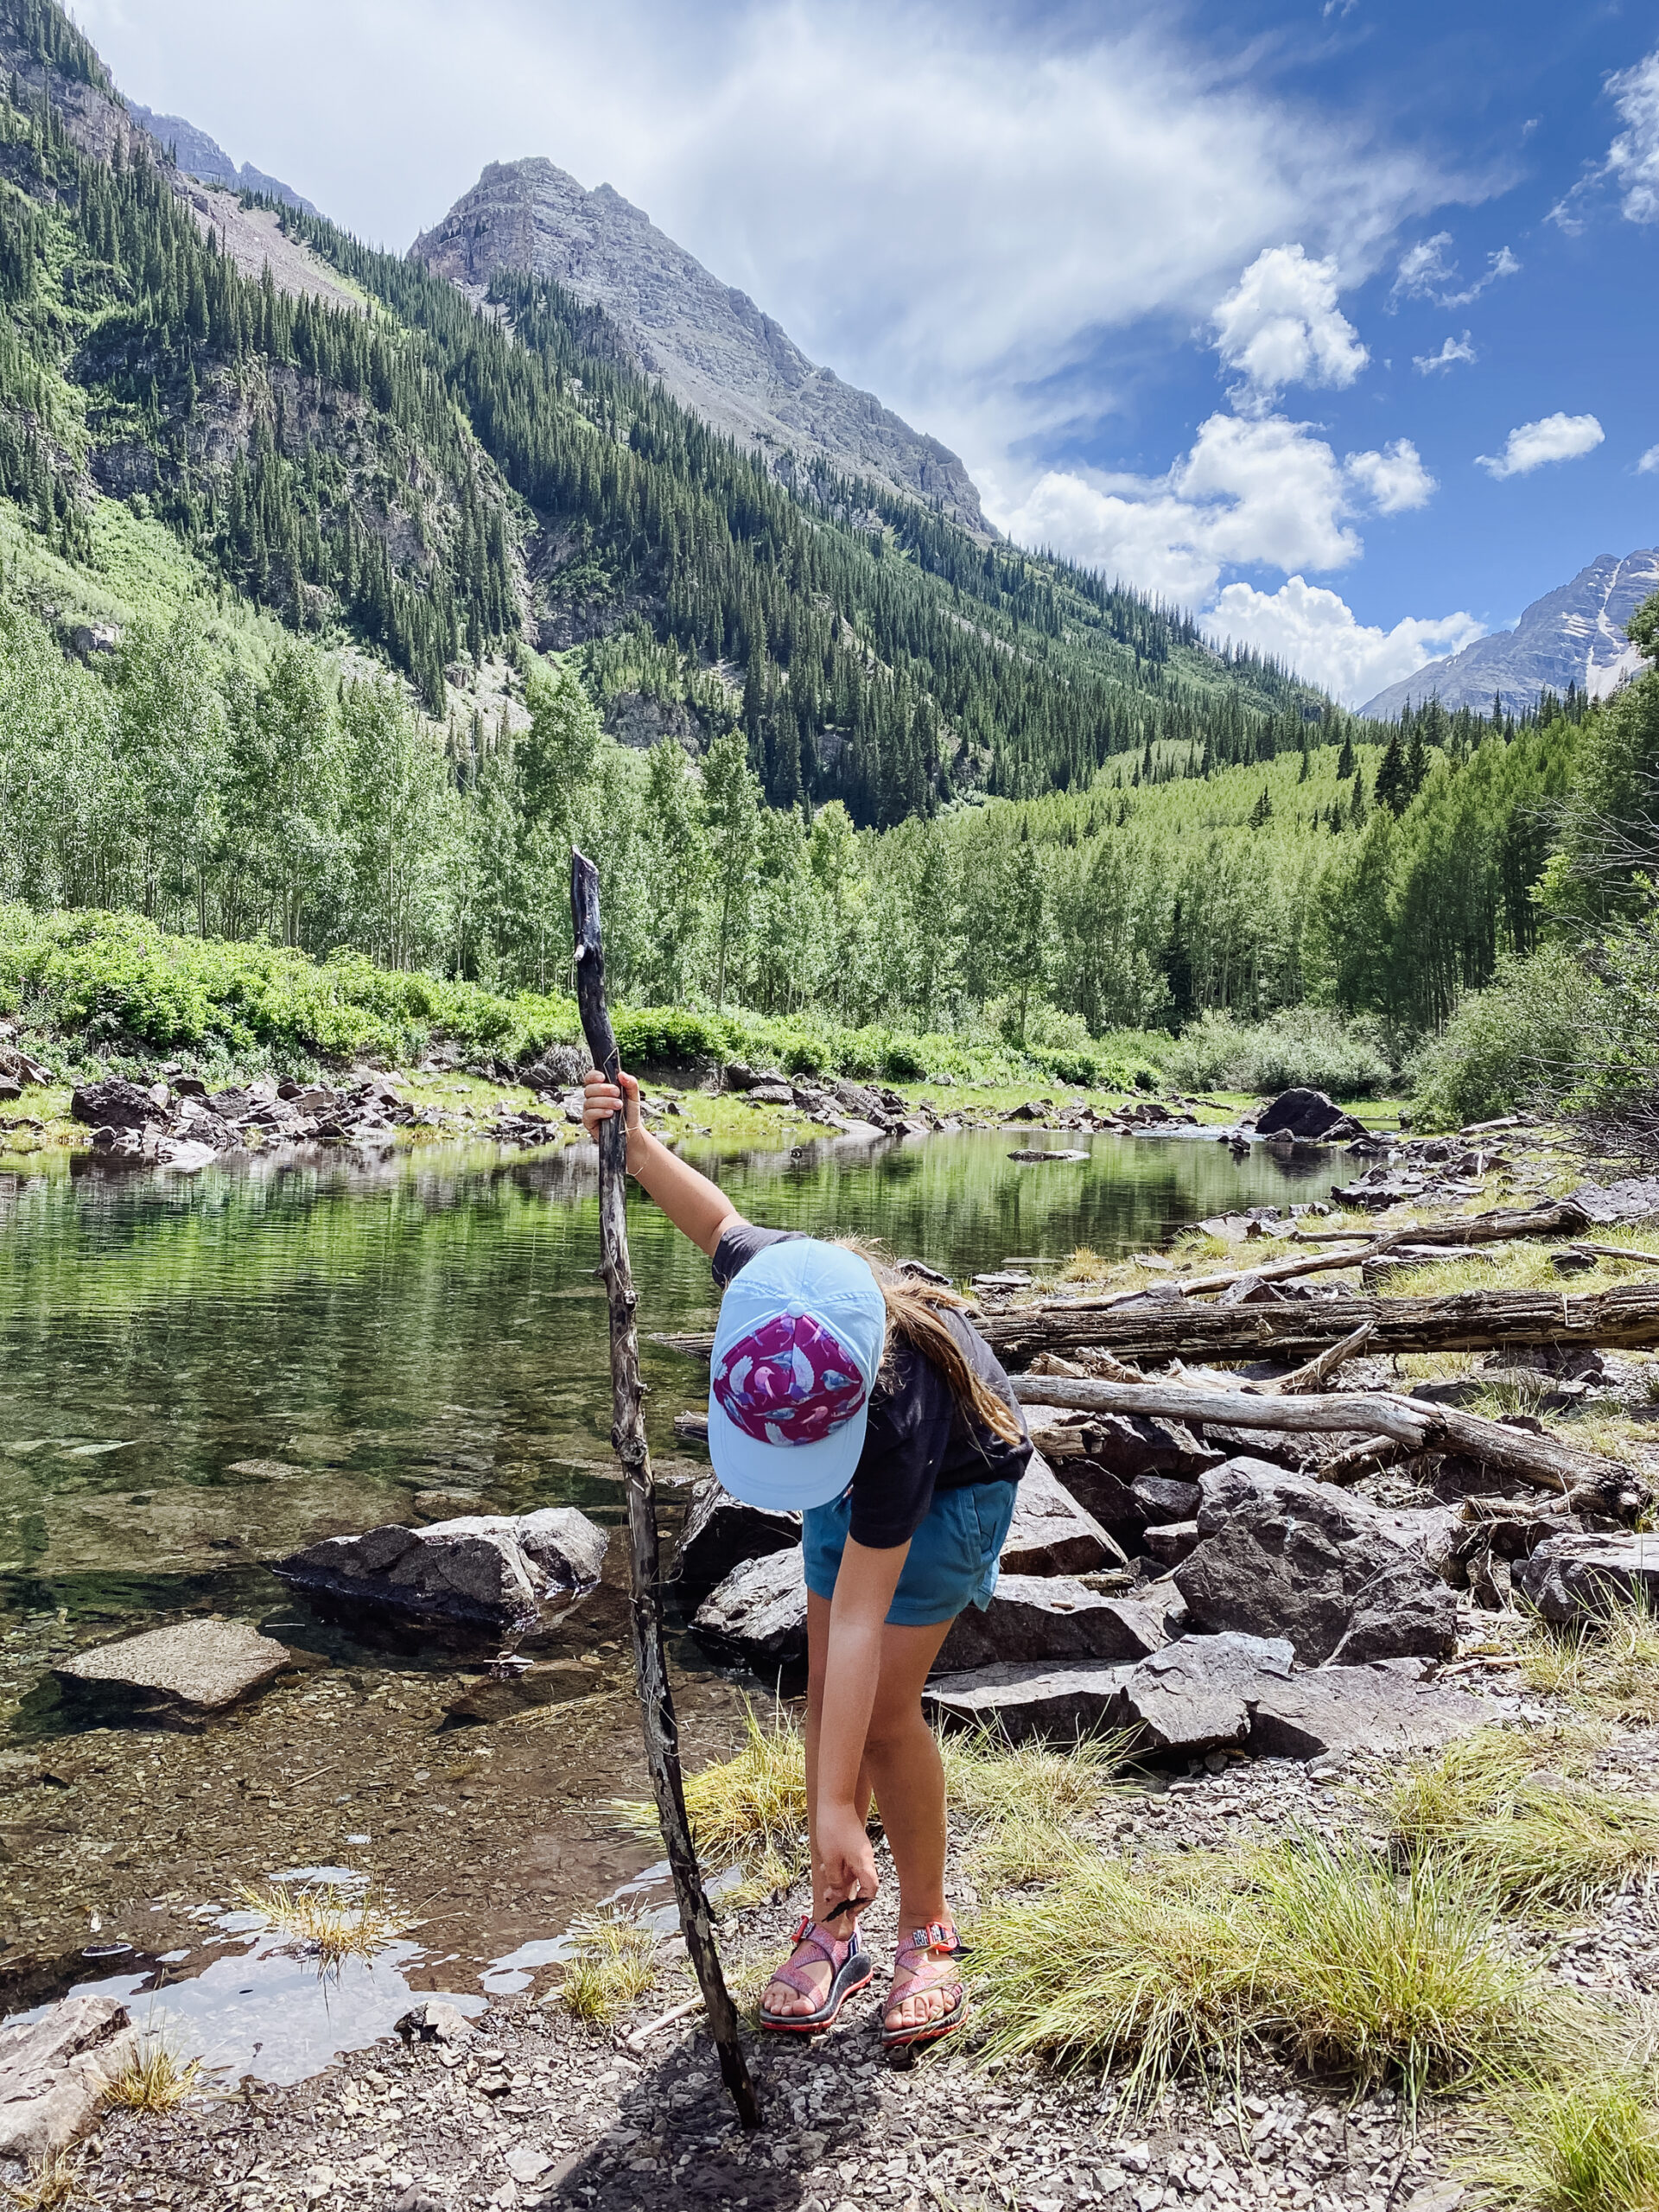 exploring maroon bells on a short hike - very kid friendly and gorgeous scenery! #theldltravels #travelwithkids